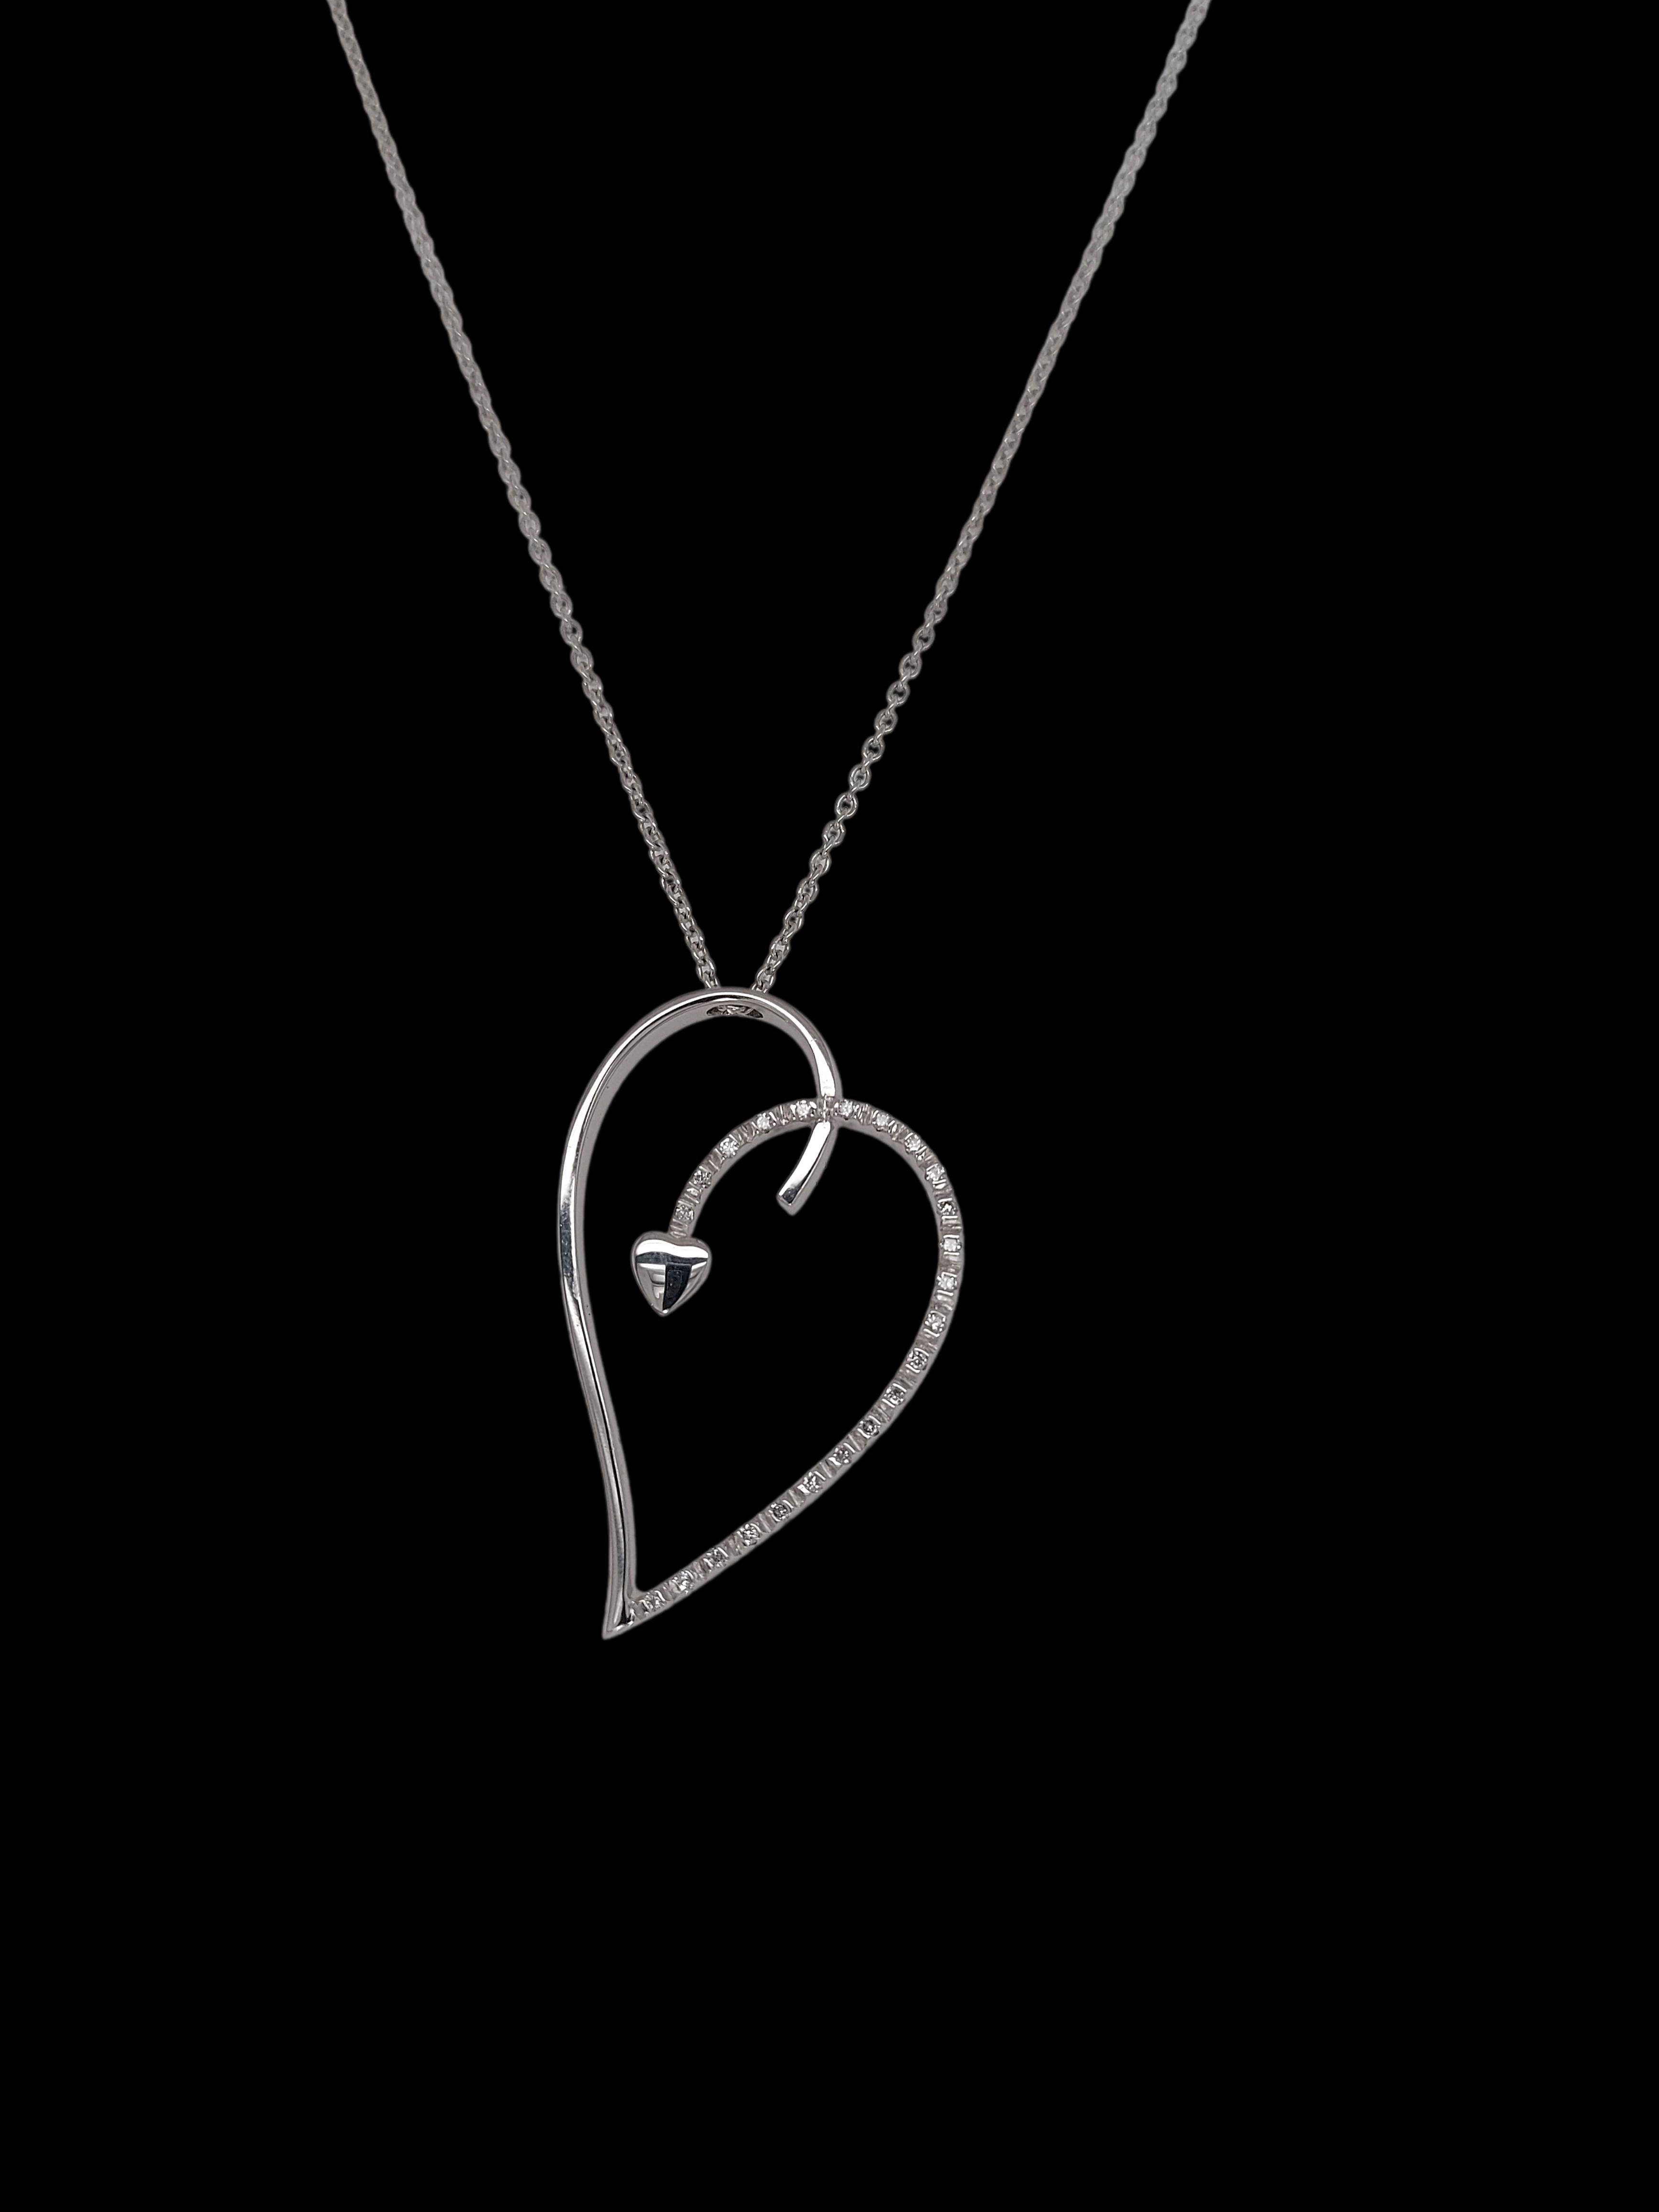 Gorgeous and Fine 18kt White Gold Kappadue Heart Shaped Necklace With 0.12ct Diamonds

Comes with a 18kt white gold necklace of 40cm long, can be worn a little shorte as well

Diamonds: Brilliant cut diamonds together ca. 0.12ct

Material: 18kt